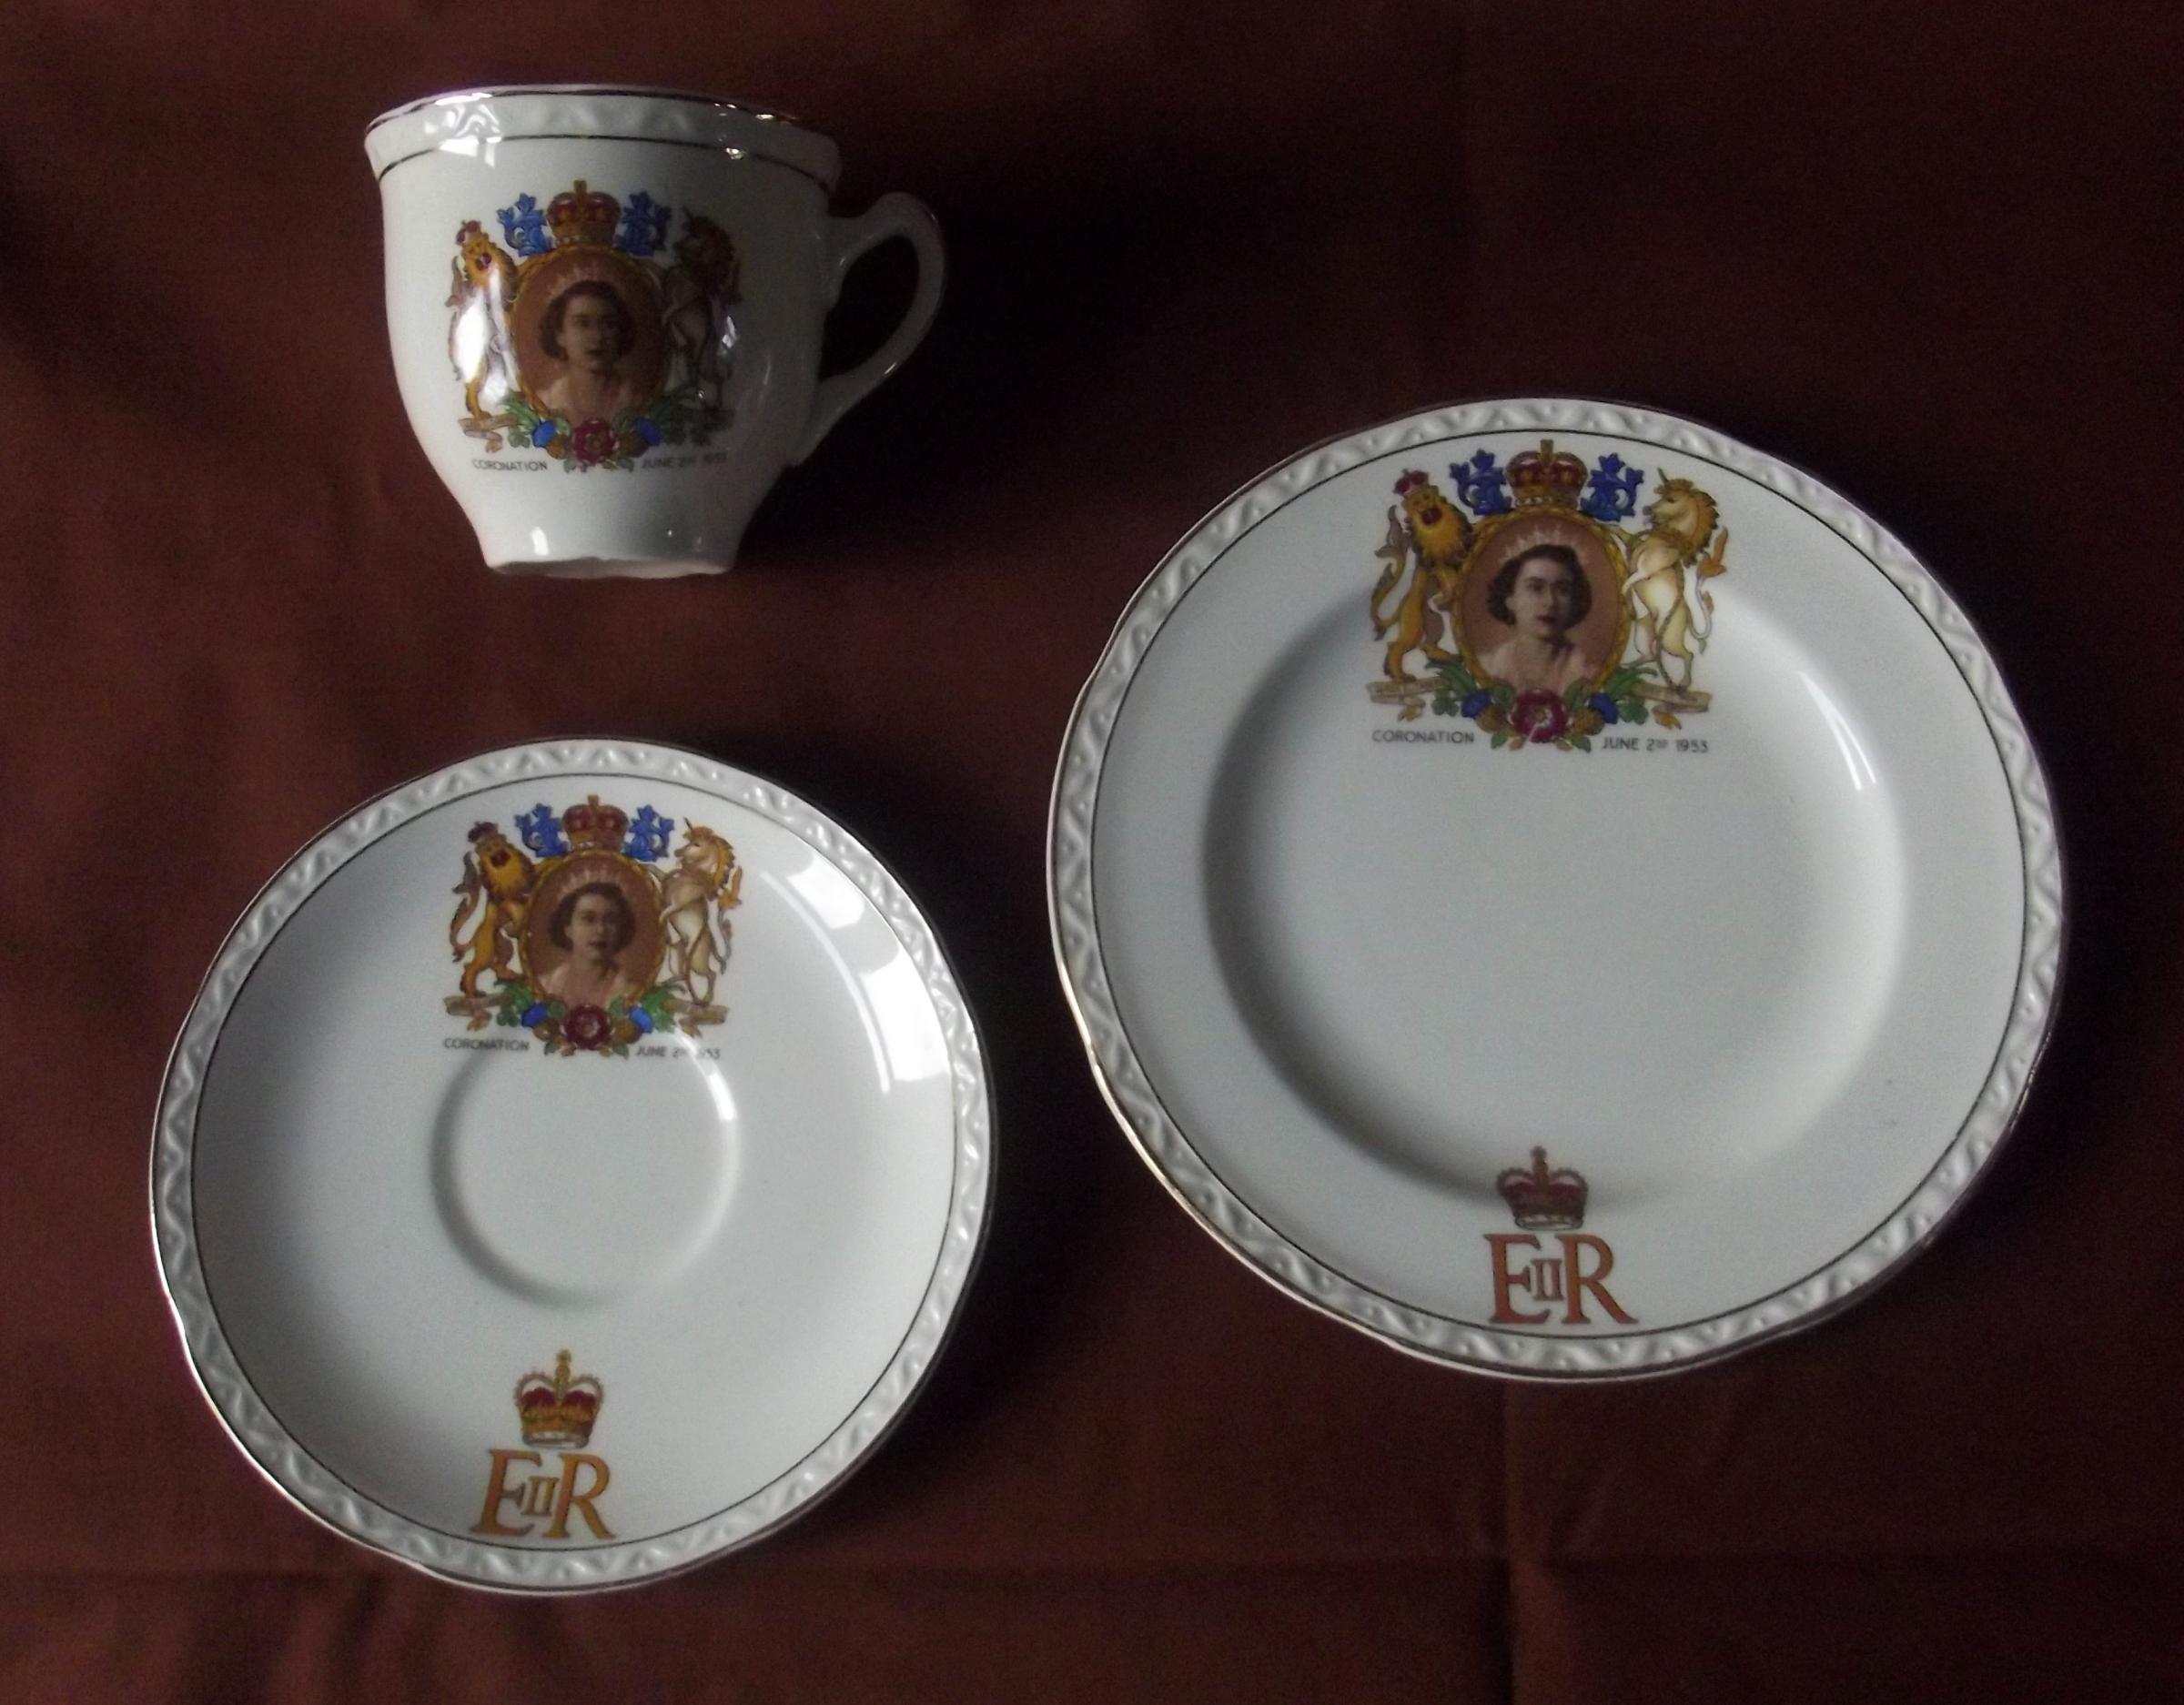 Children were showered with souvenir crockery on Coronation Day. I received my coronation cup, saucer and plate set in 1953 from Perrone School in Catterick Camp, says Josephine Power, sending in a picture of her set. My future husband received